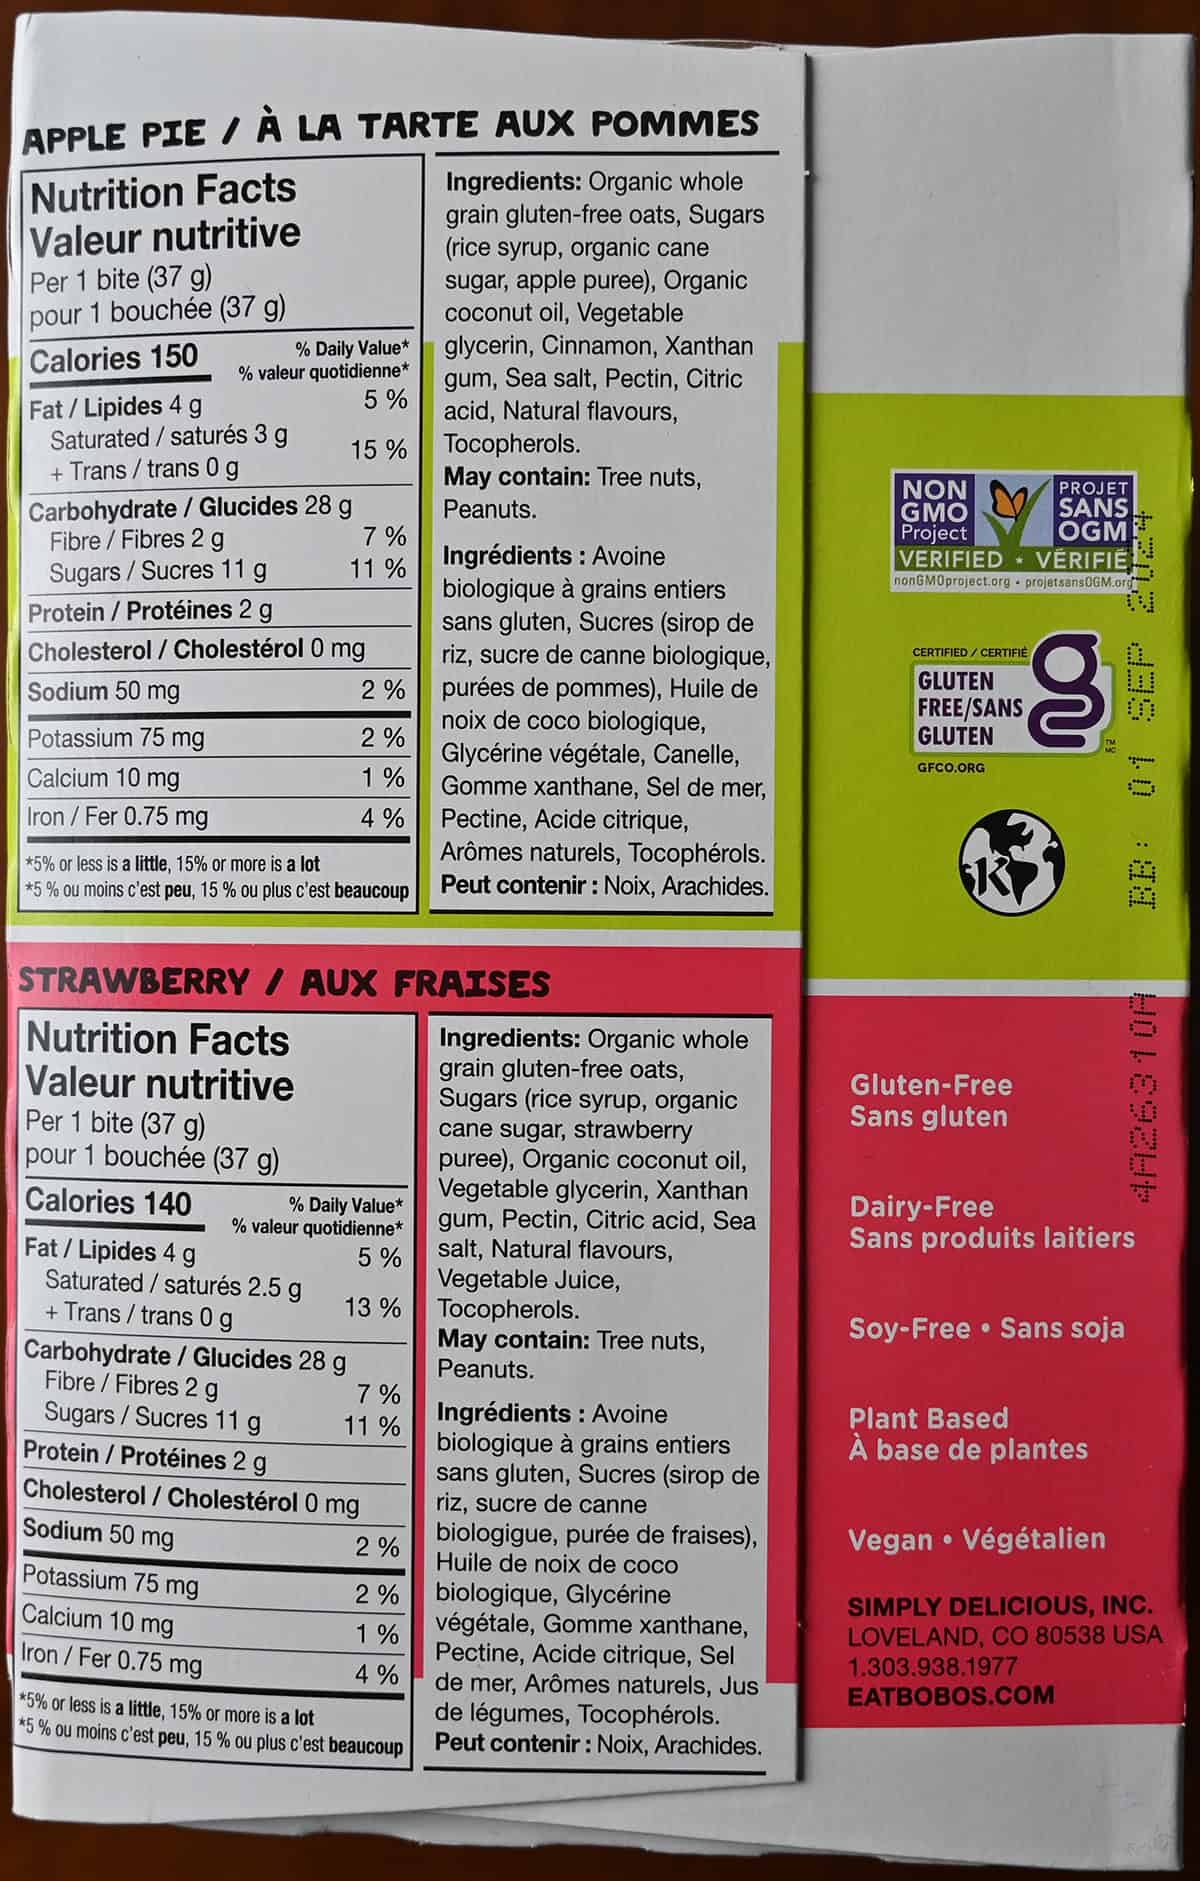 Image of the back of the box showing the oat bites are gluten-free, dairy-free, plant based and soy-free.